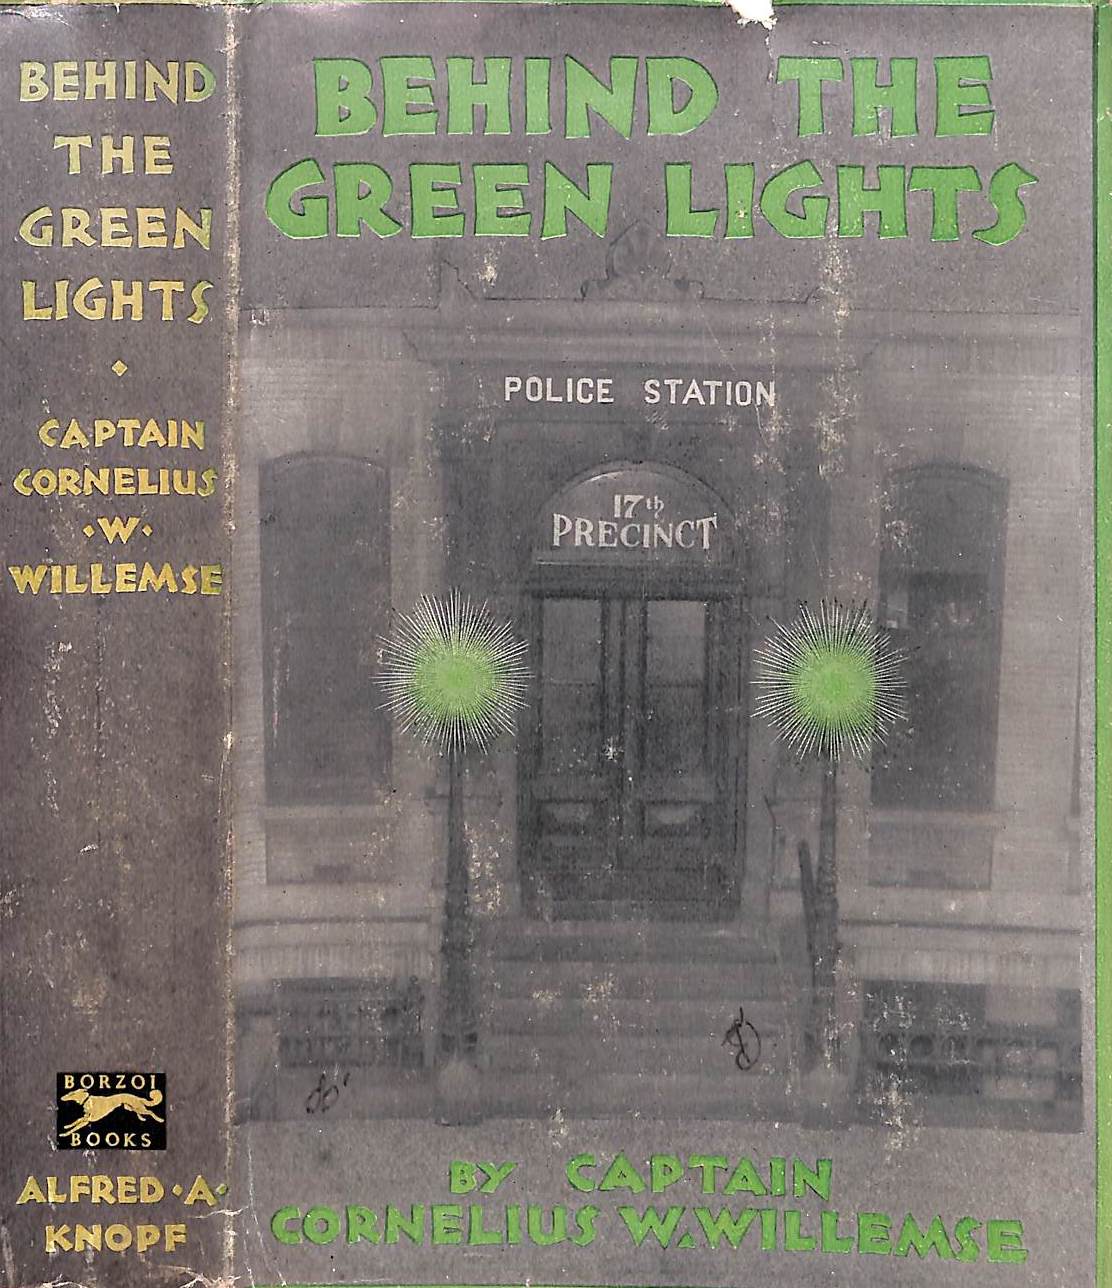 "Behind The Green Lights" 1931 WILLEMSE, Captain Cornelius W.